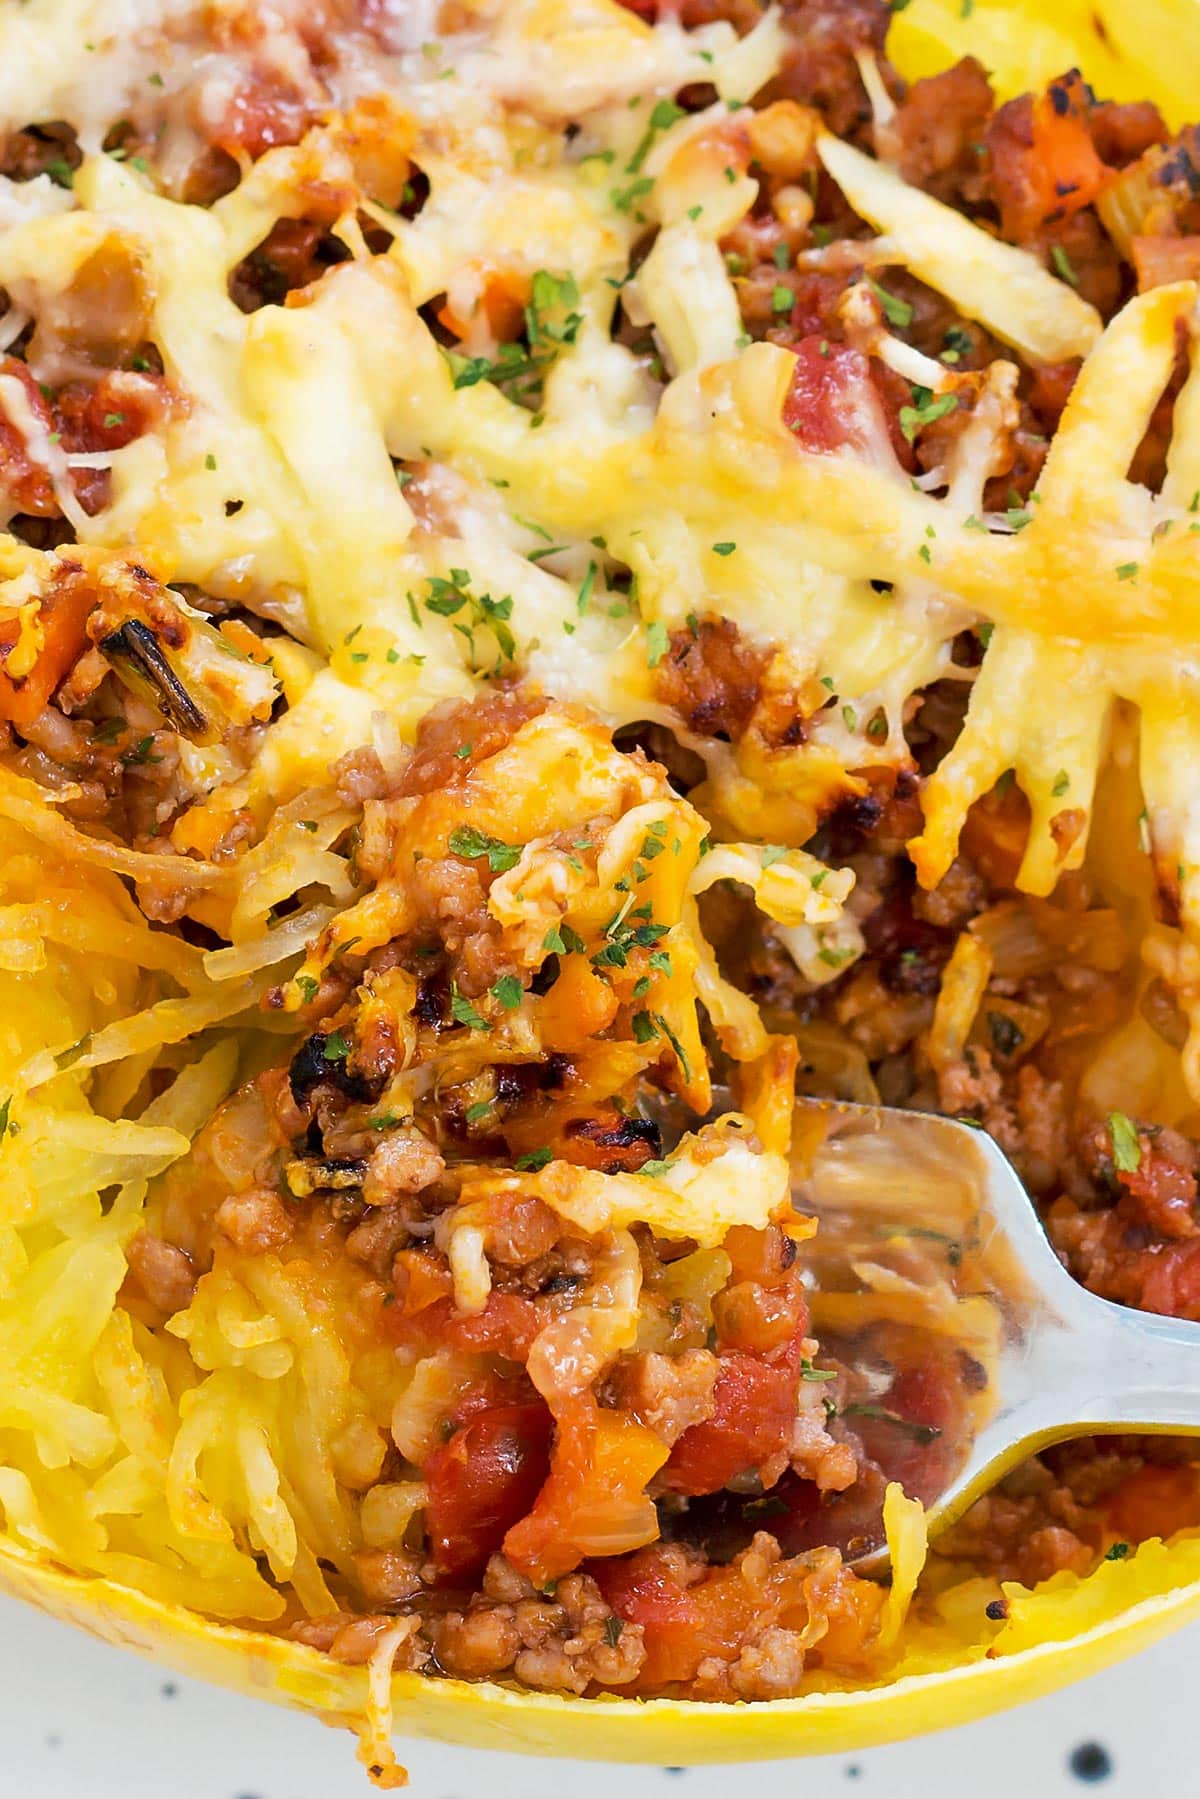 Spaghetti Squash with Meat Sauce close up